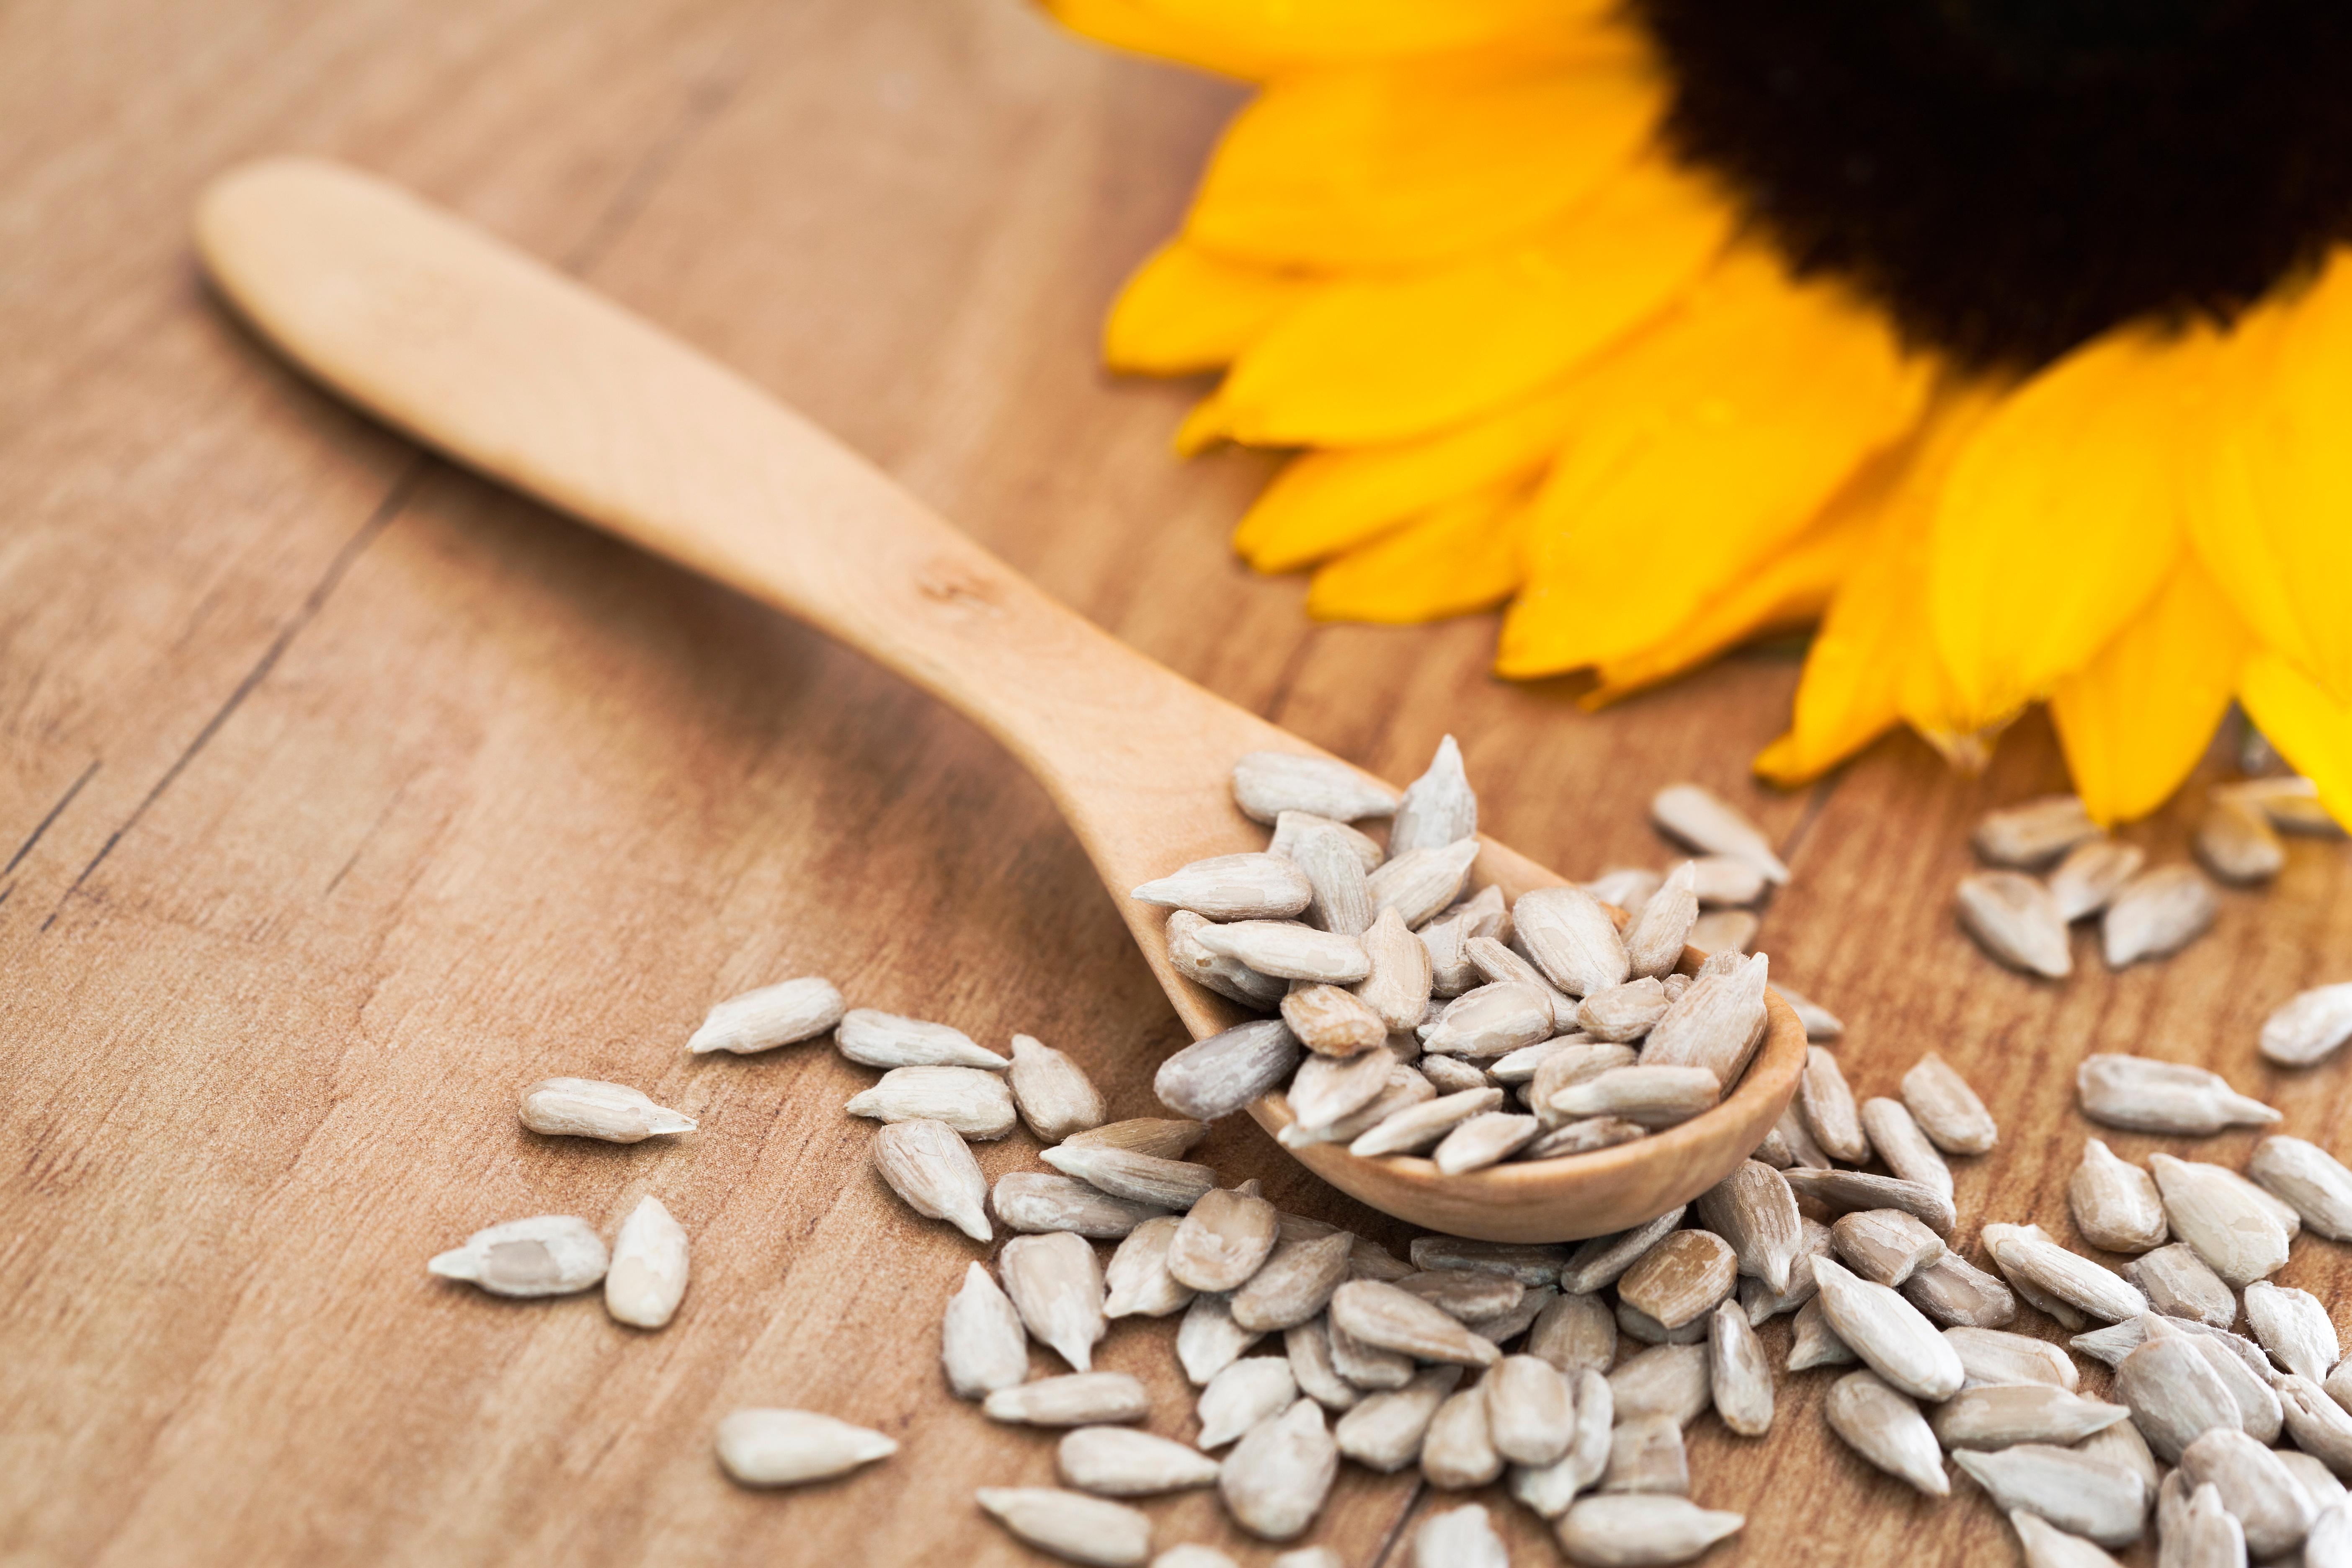 Baby and Toddler Finger Foods- Sunflower seeds are a great finger food snack for your little one.